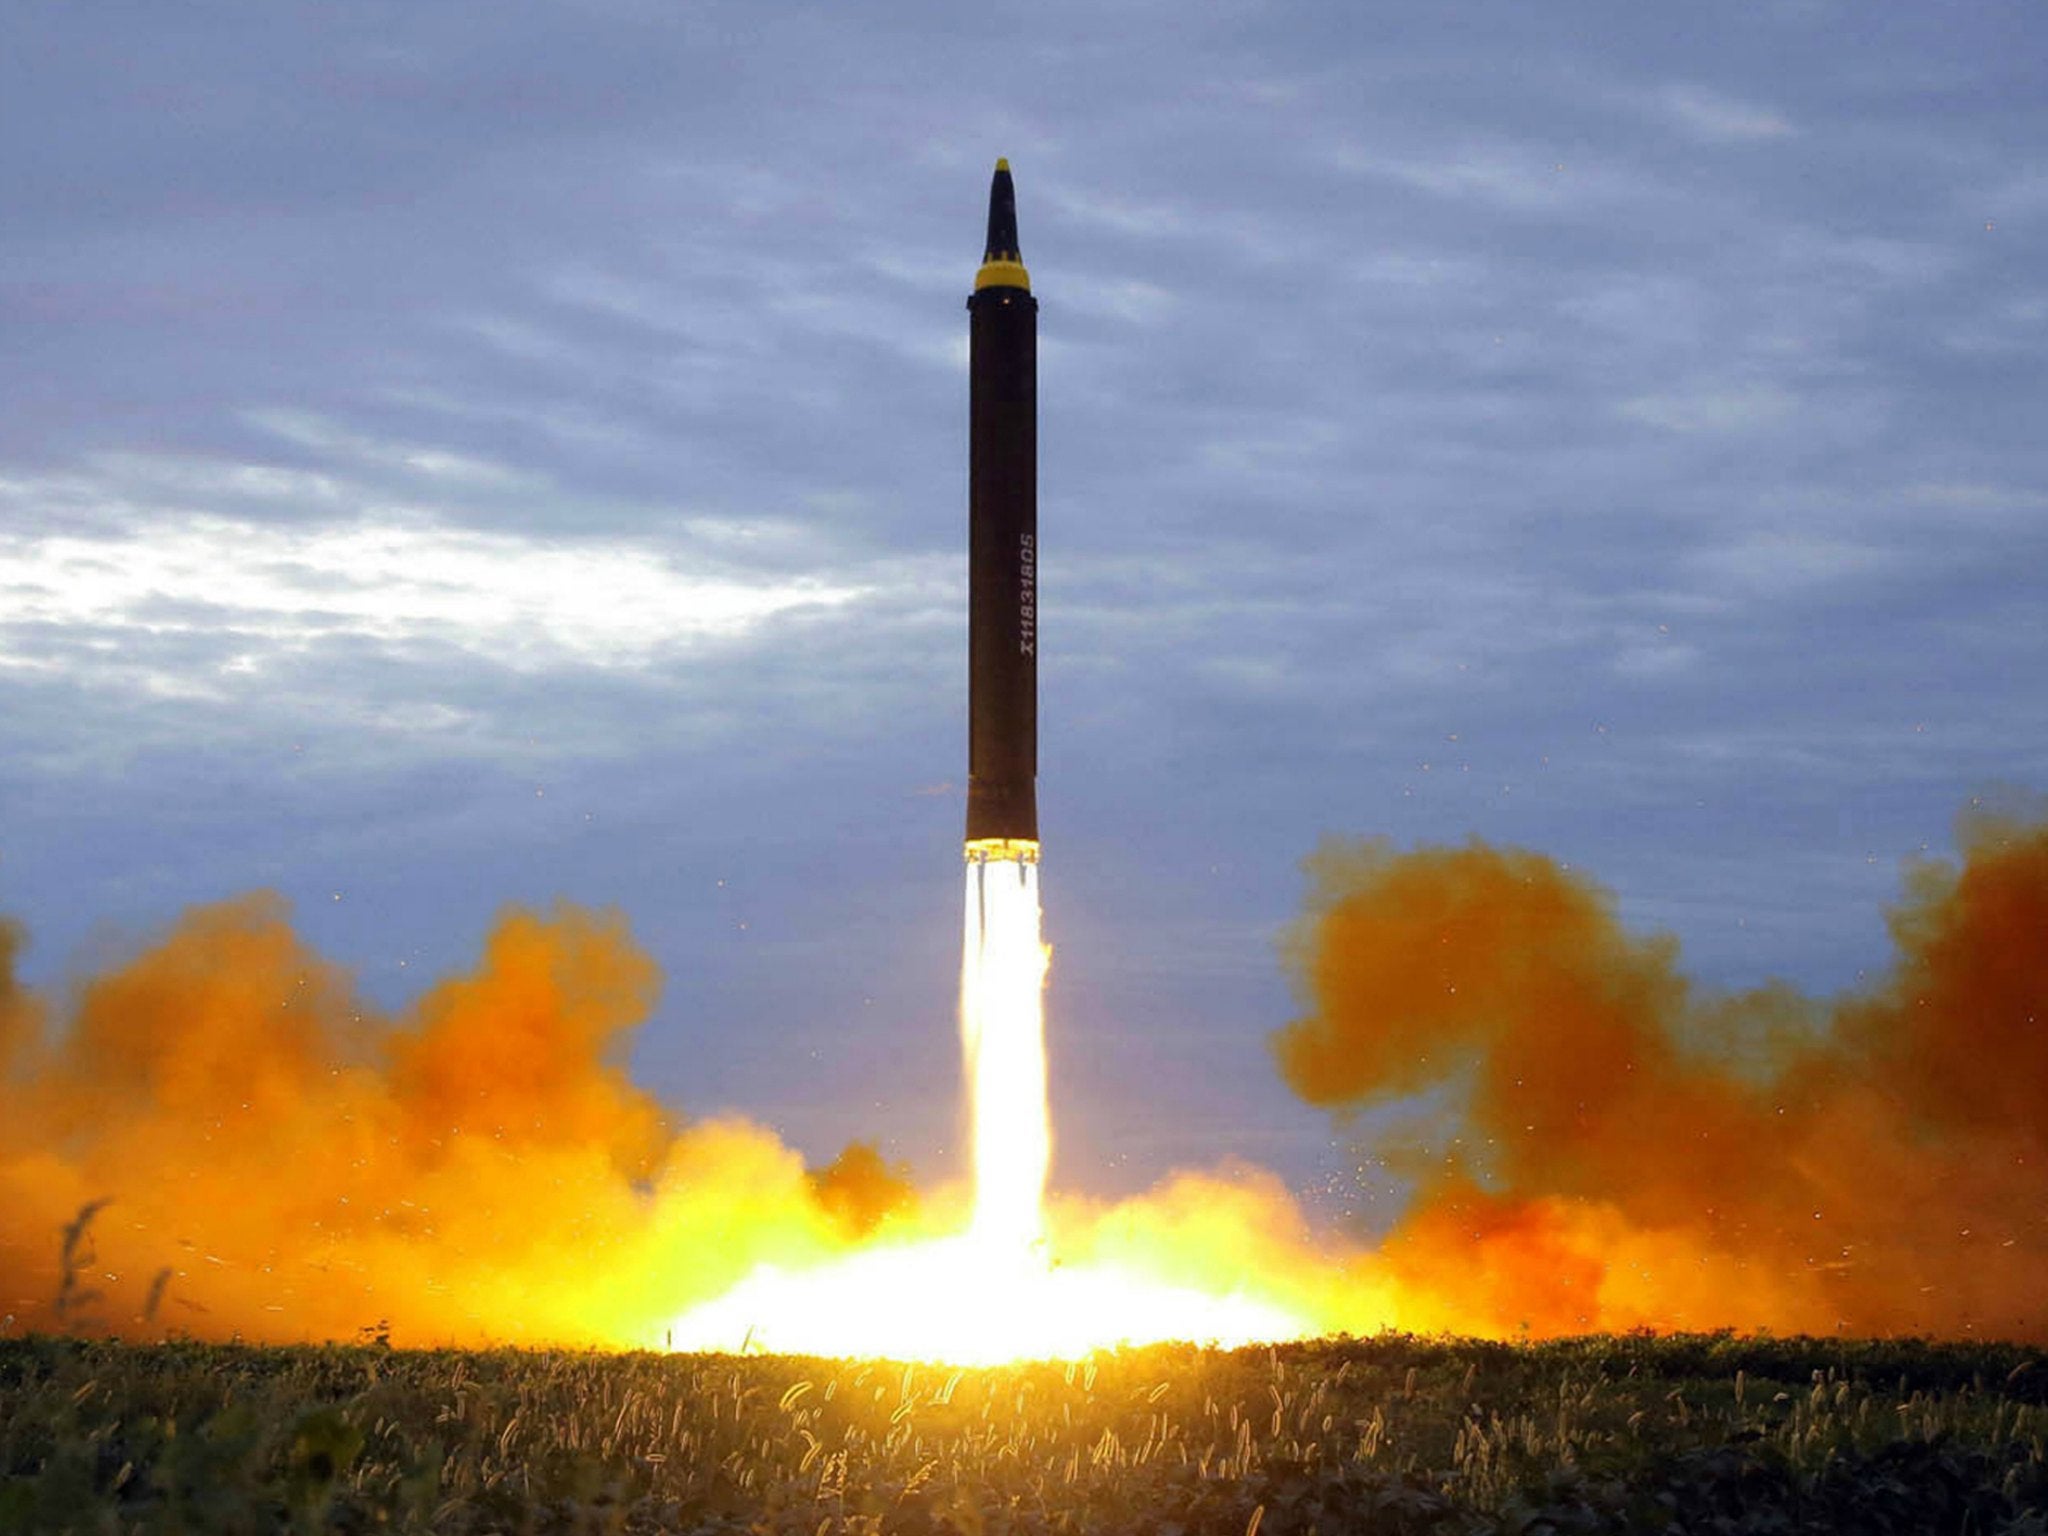 The test launch of a Hwasong-12 intermediate range missile, which also flew over Japan, from Pyongyang in August